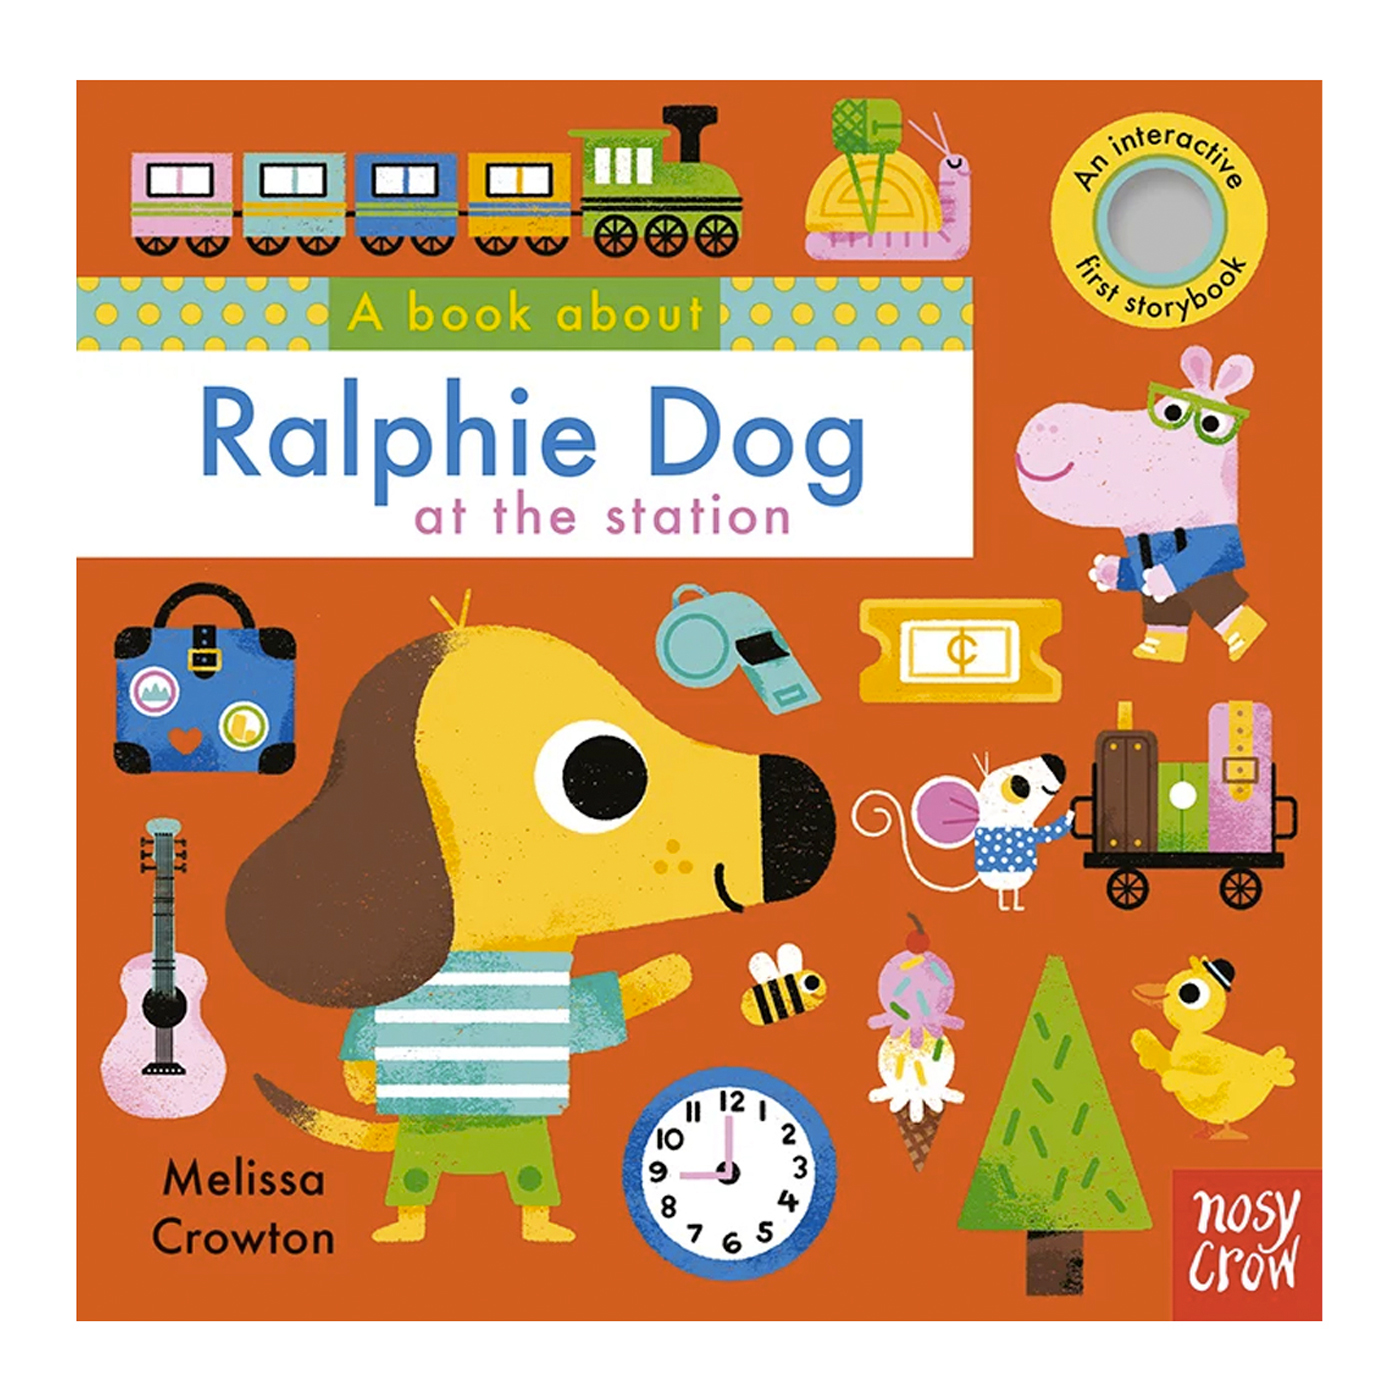 NOSY CROW A book about Ralphie Dog at the station